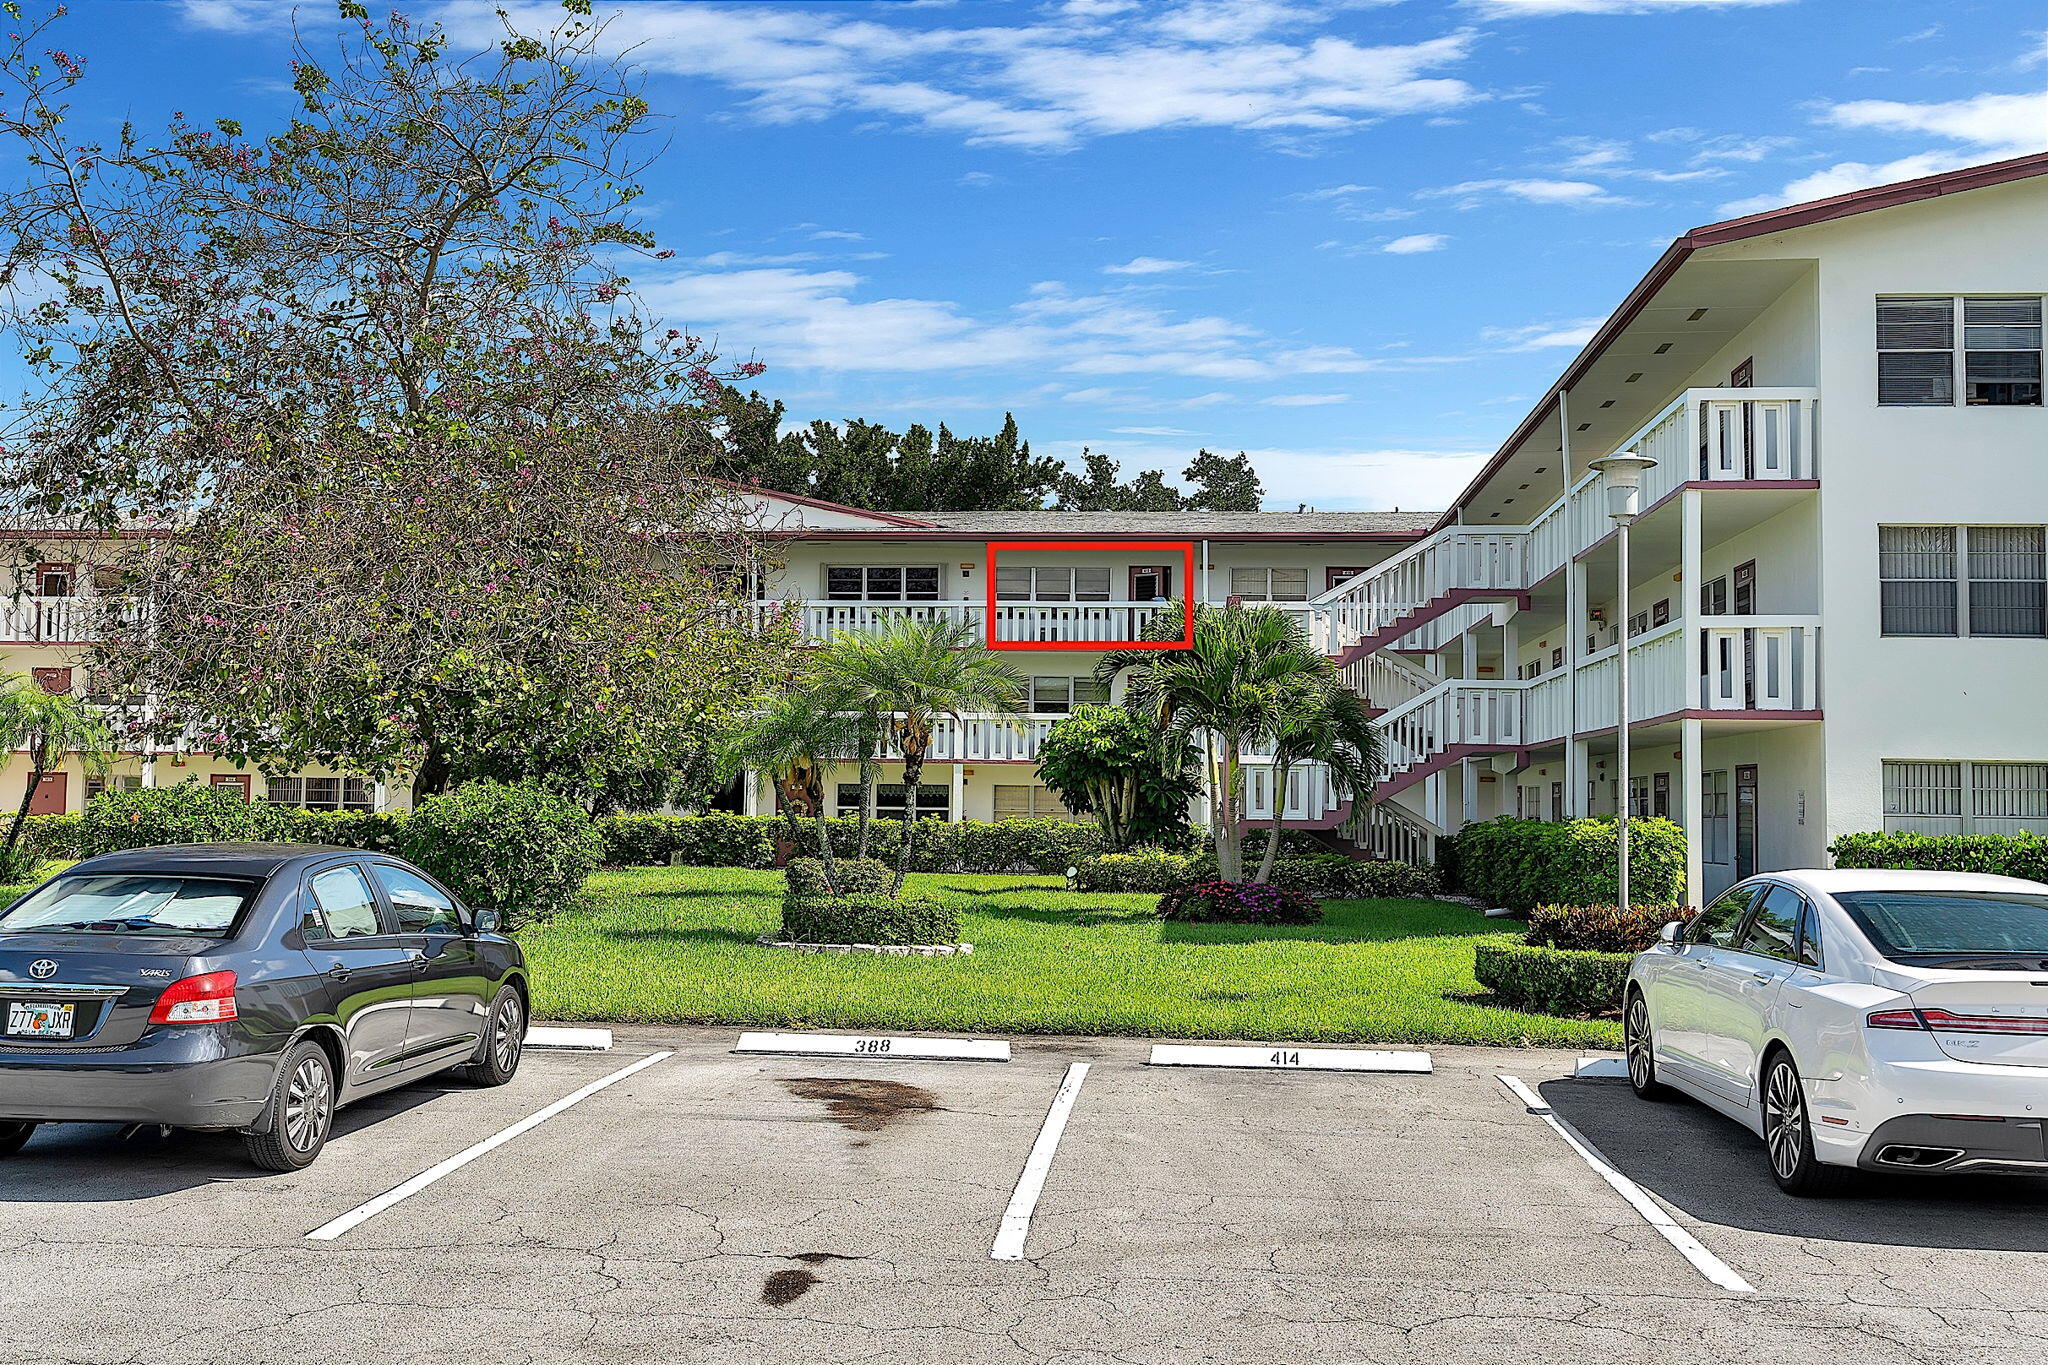 a view of a car park in front of house